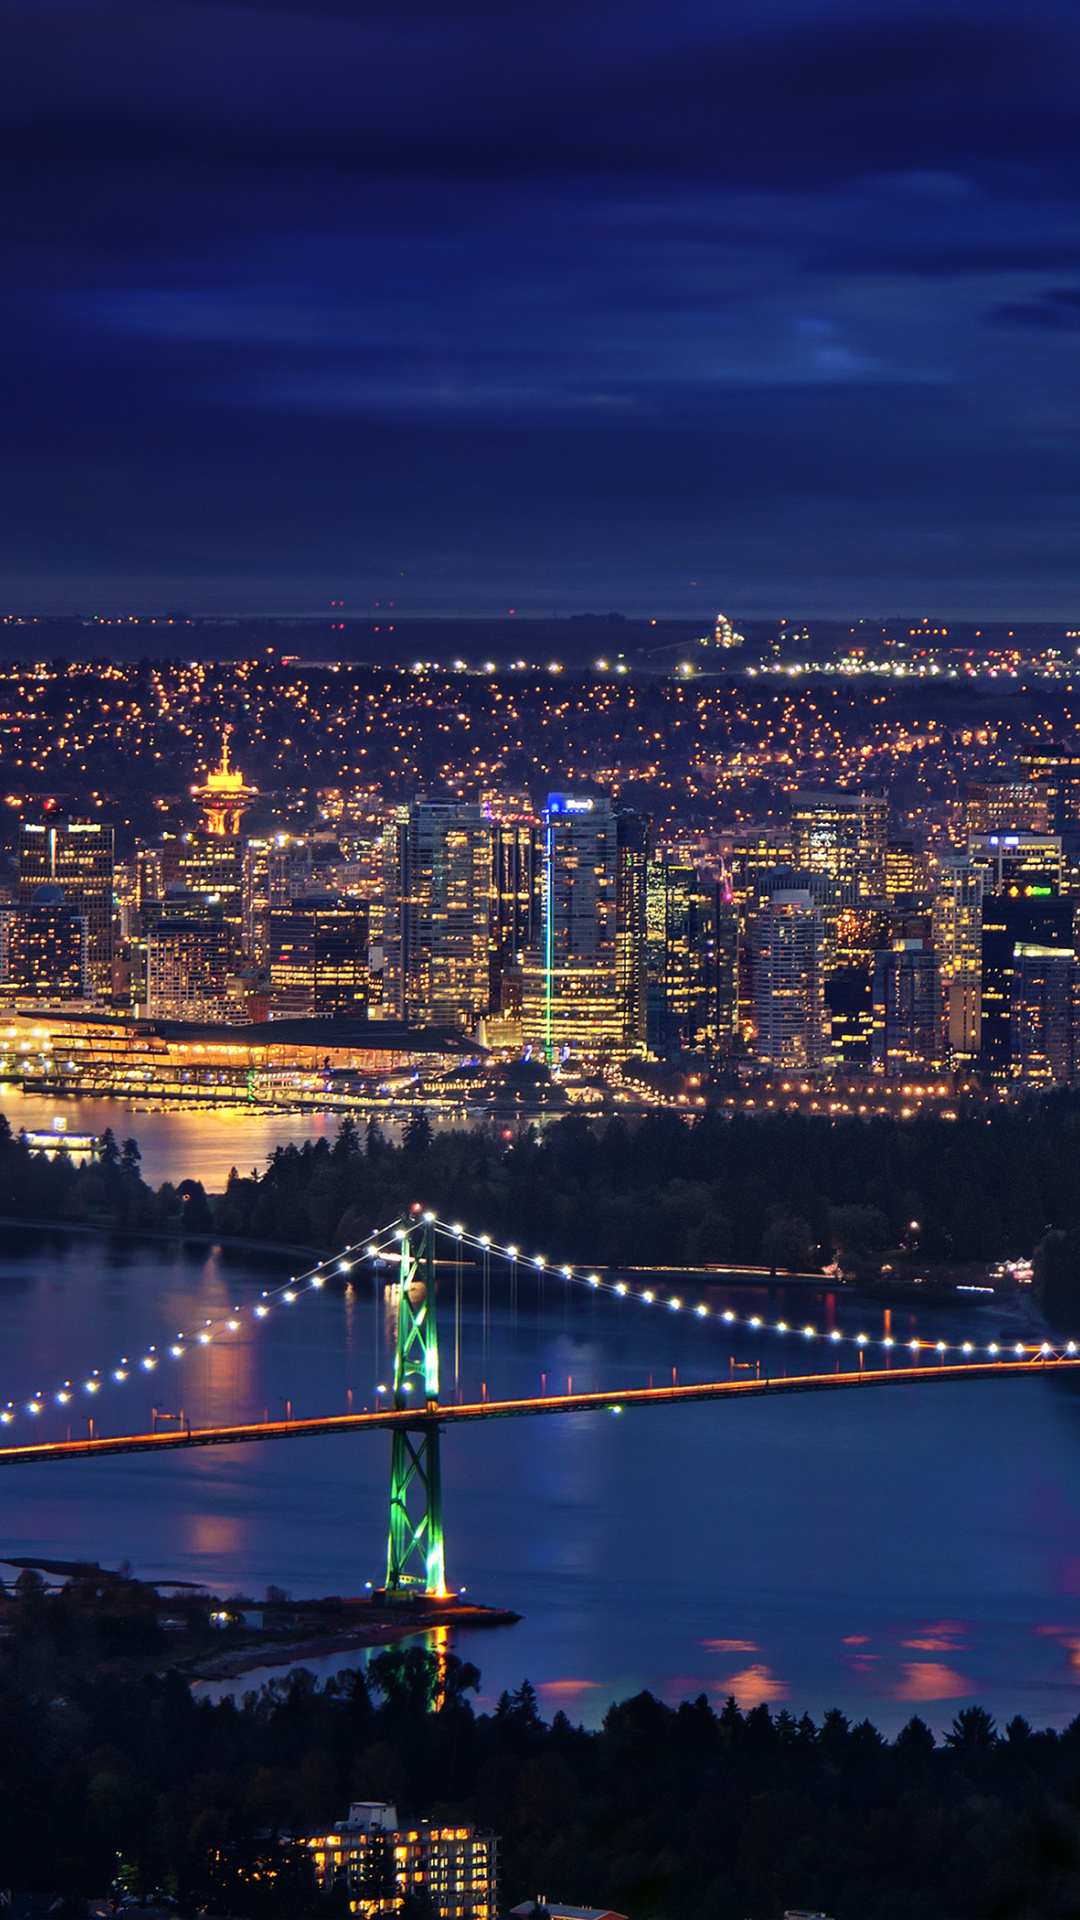 Images of downtown Vancouver, Canada, Nighttime city bridges, Urban landscapes, Striking views, 1080x1920 Full HD Phone